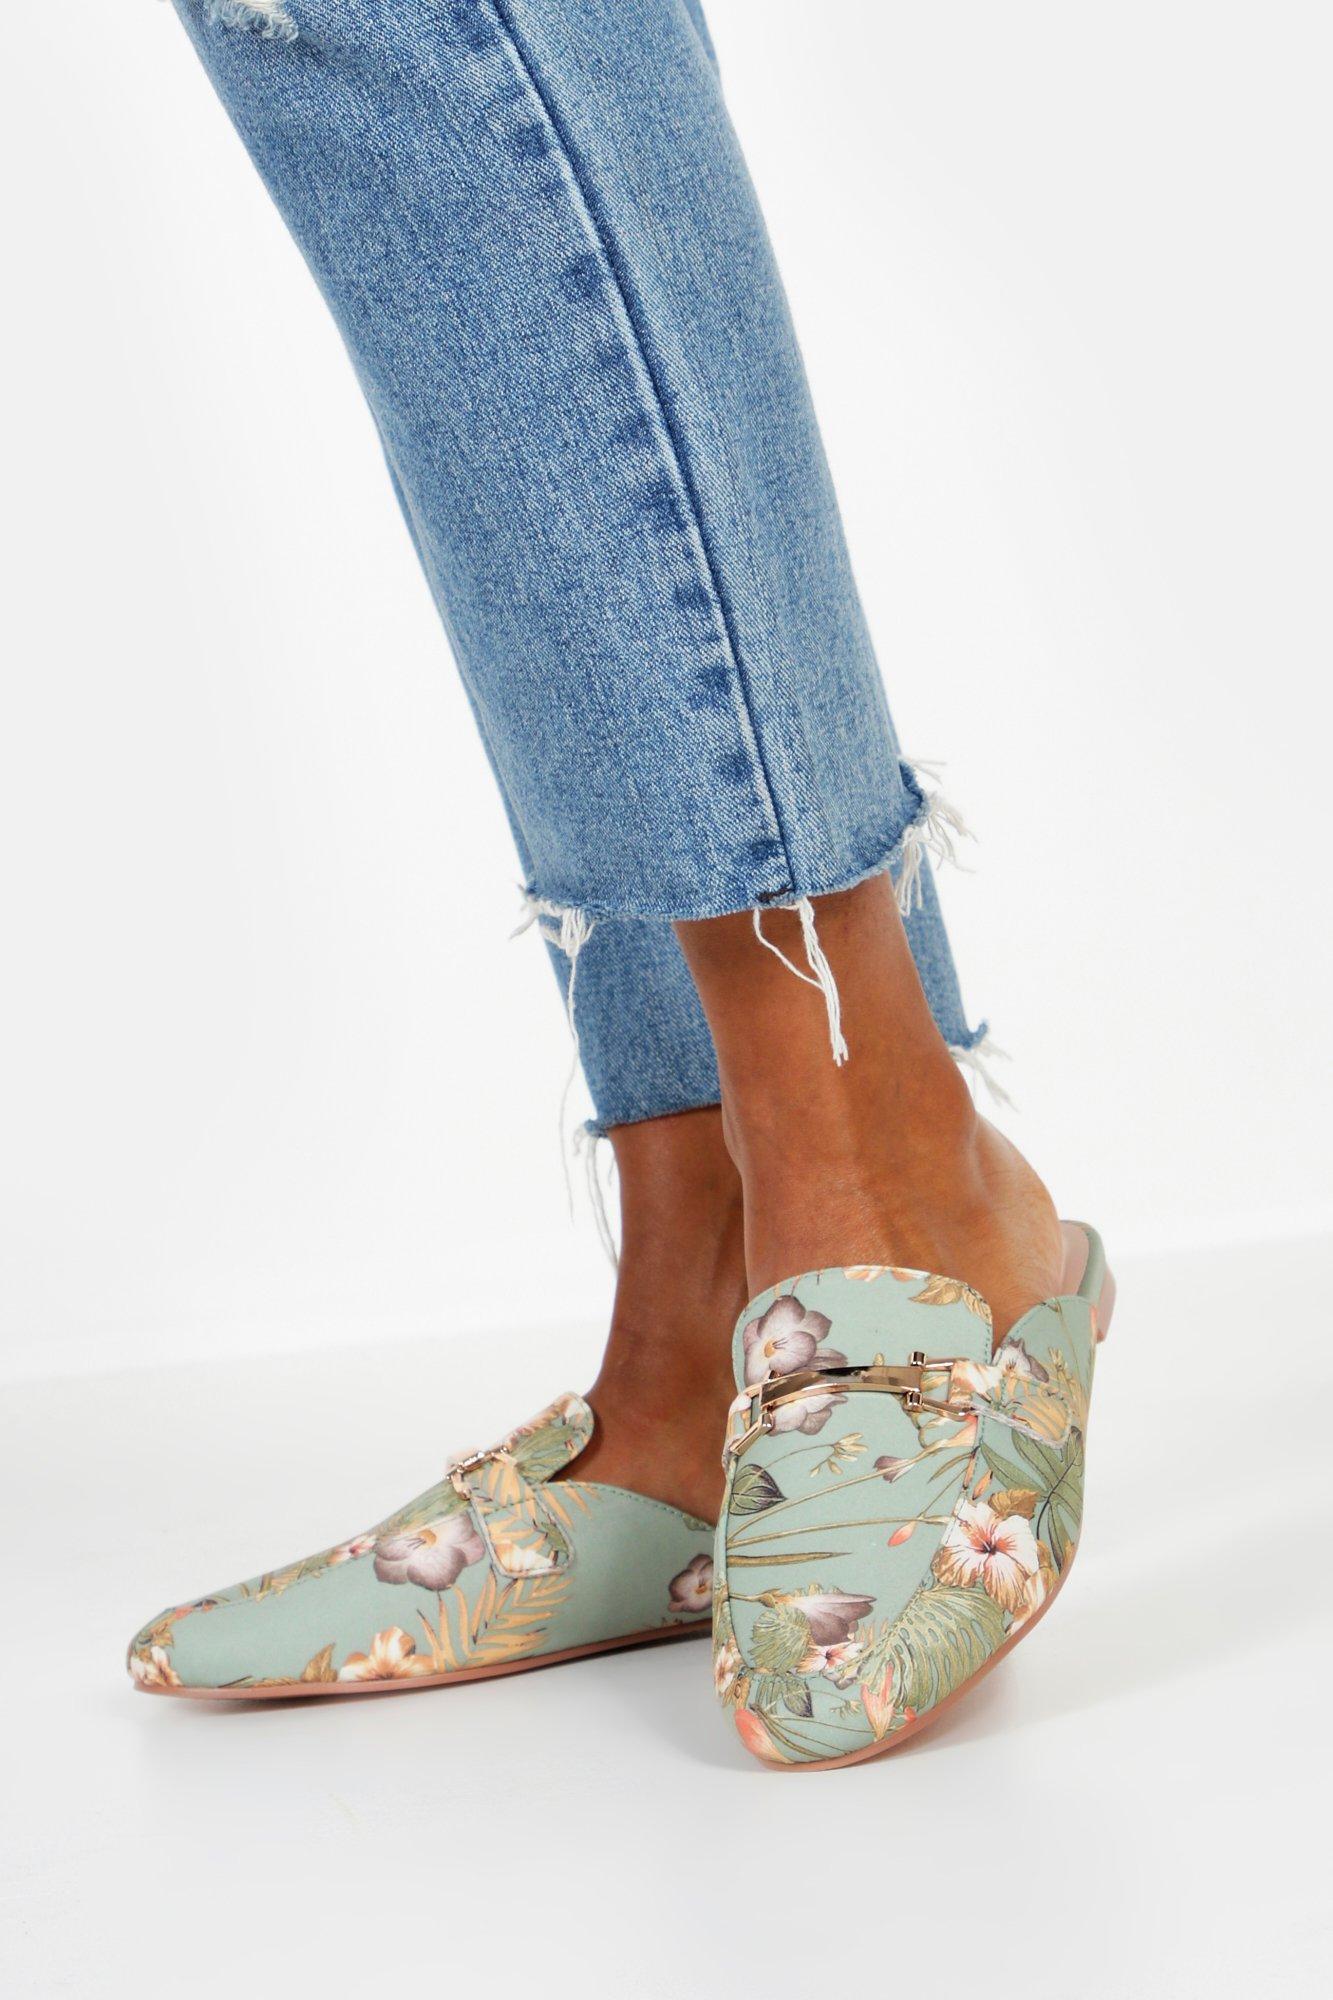 Flat Shoes | Women's Shoes, Pumps and Slippers | boohoo